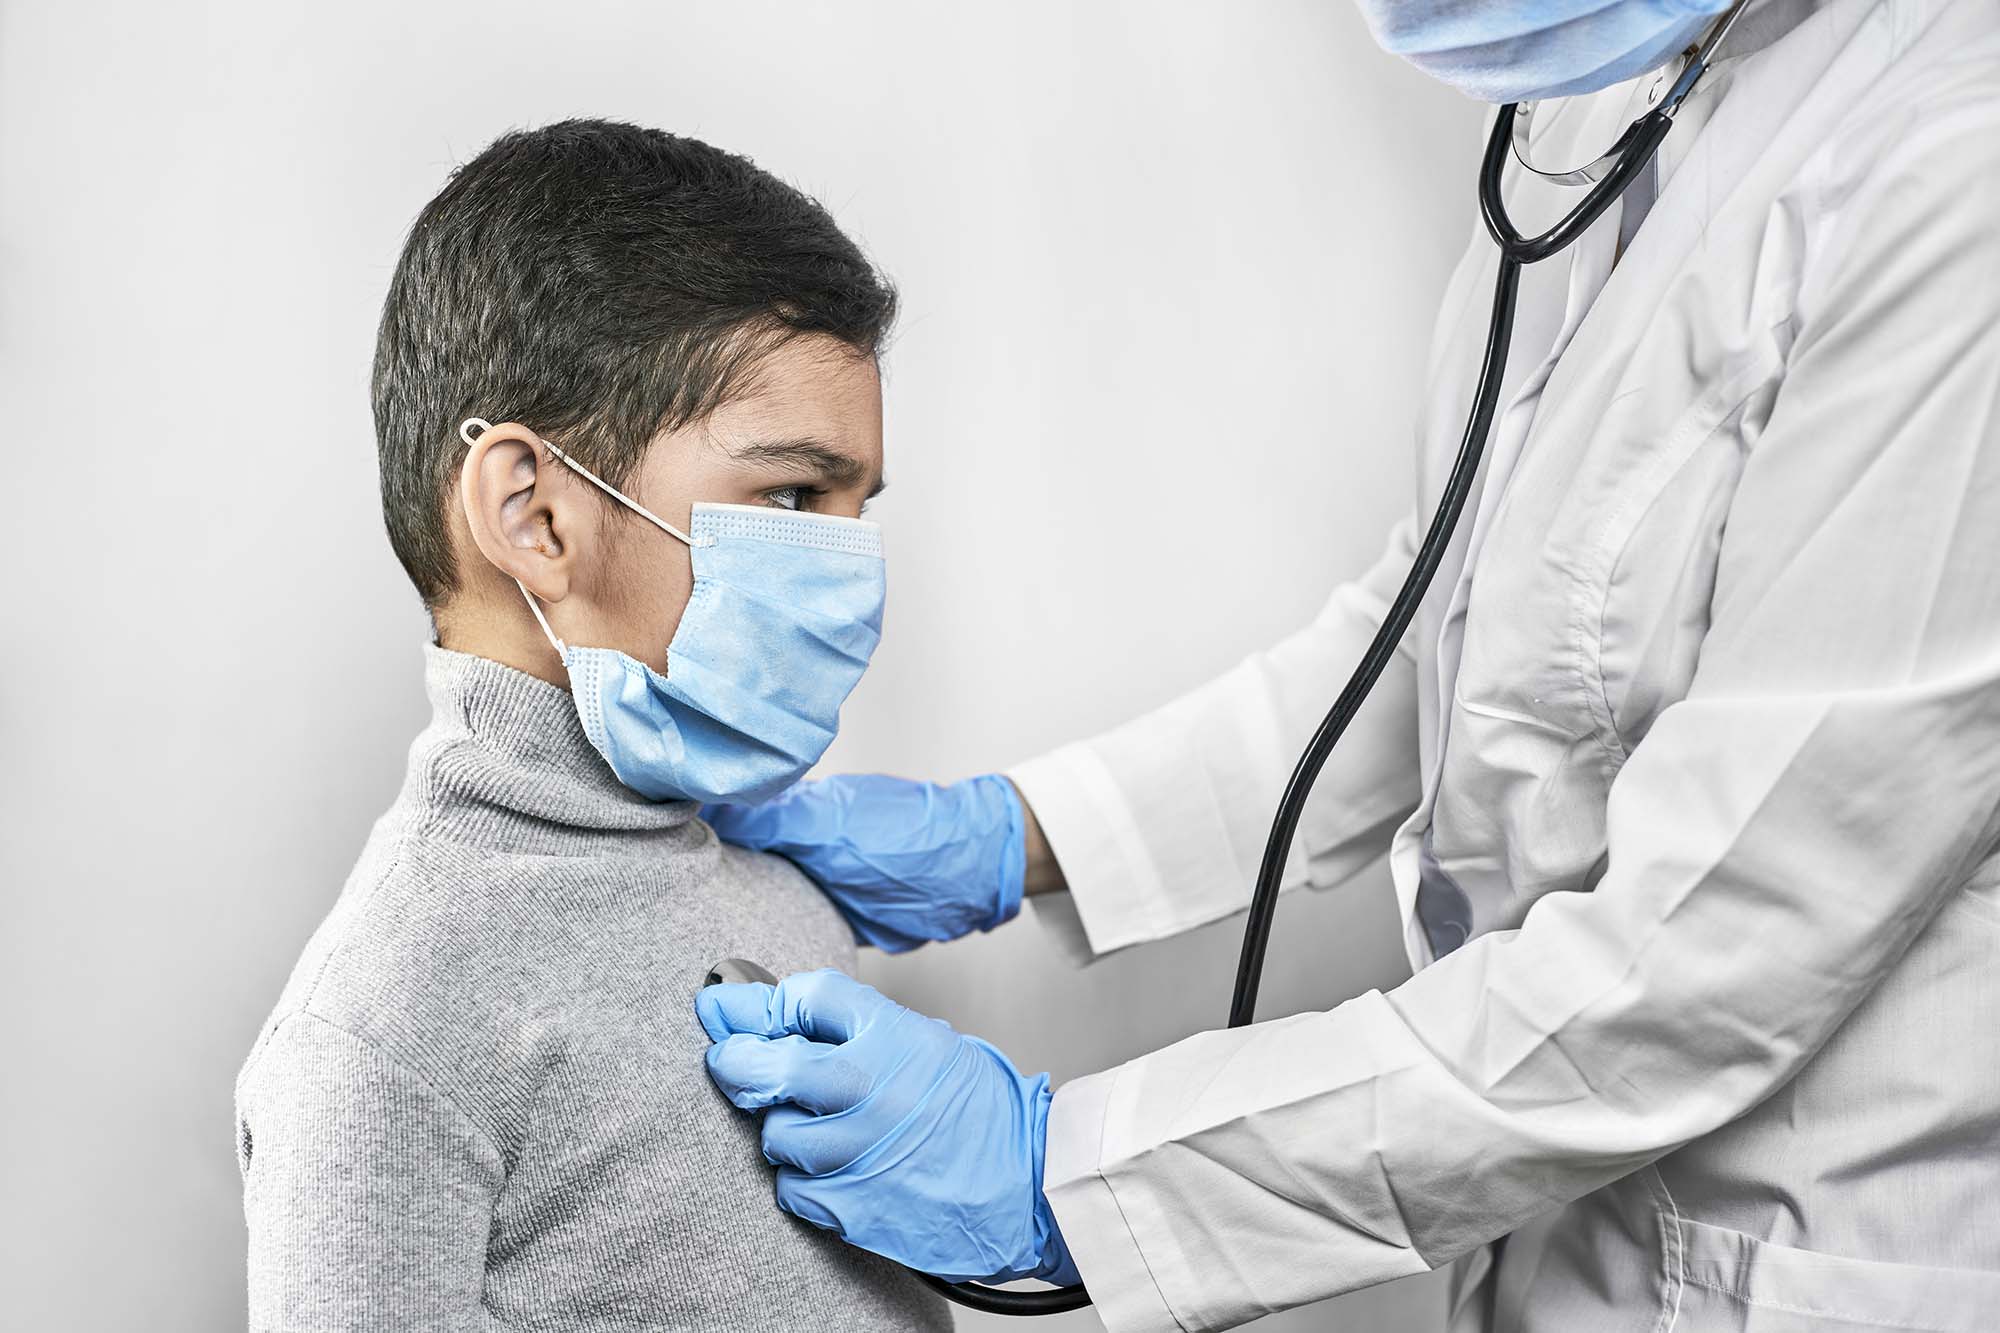 An image of a masked student being cared for by a school nurse.